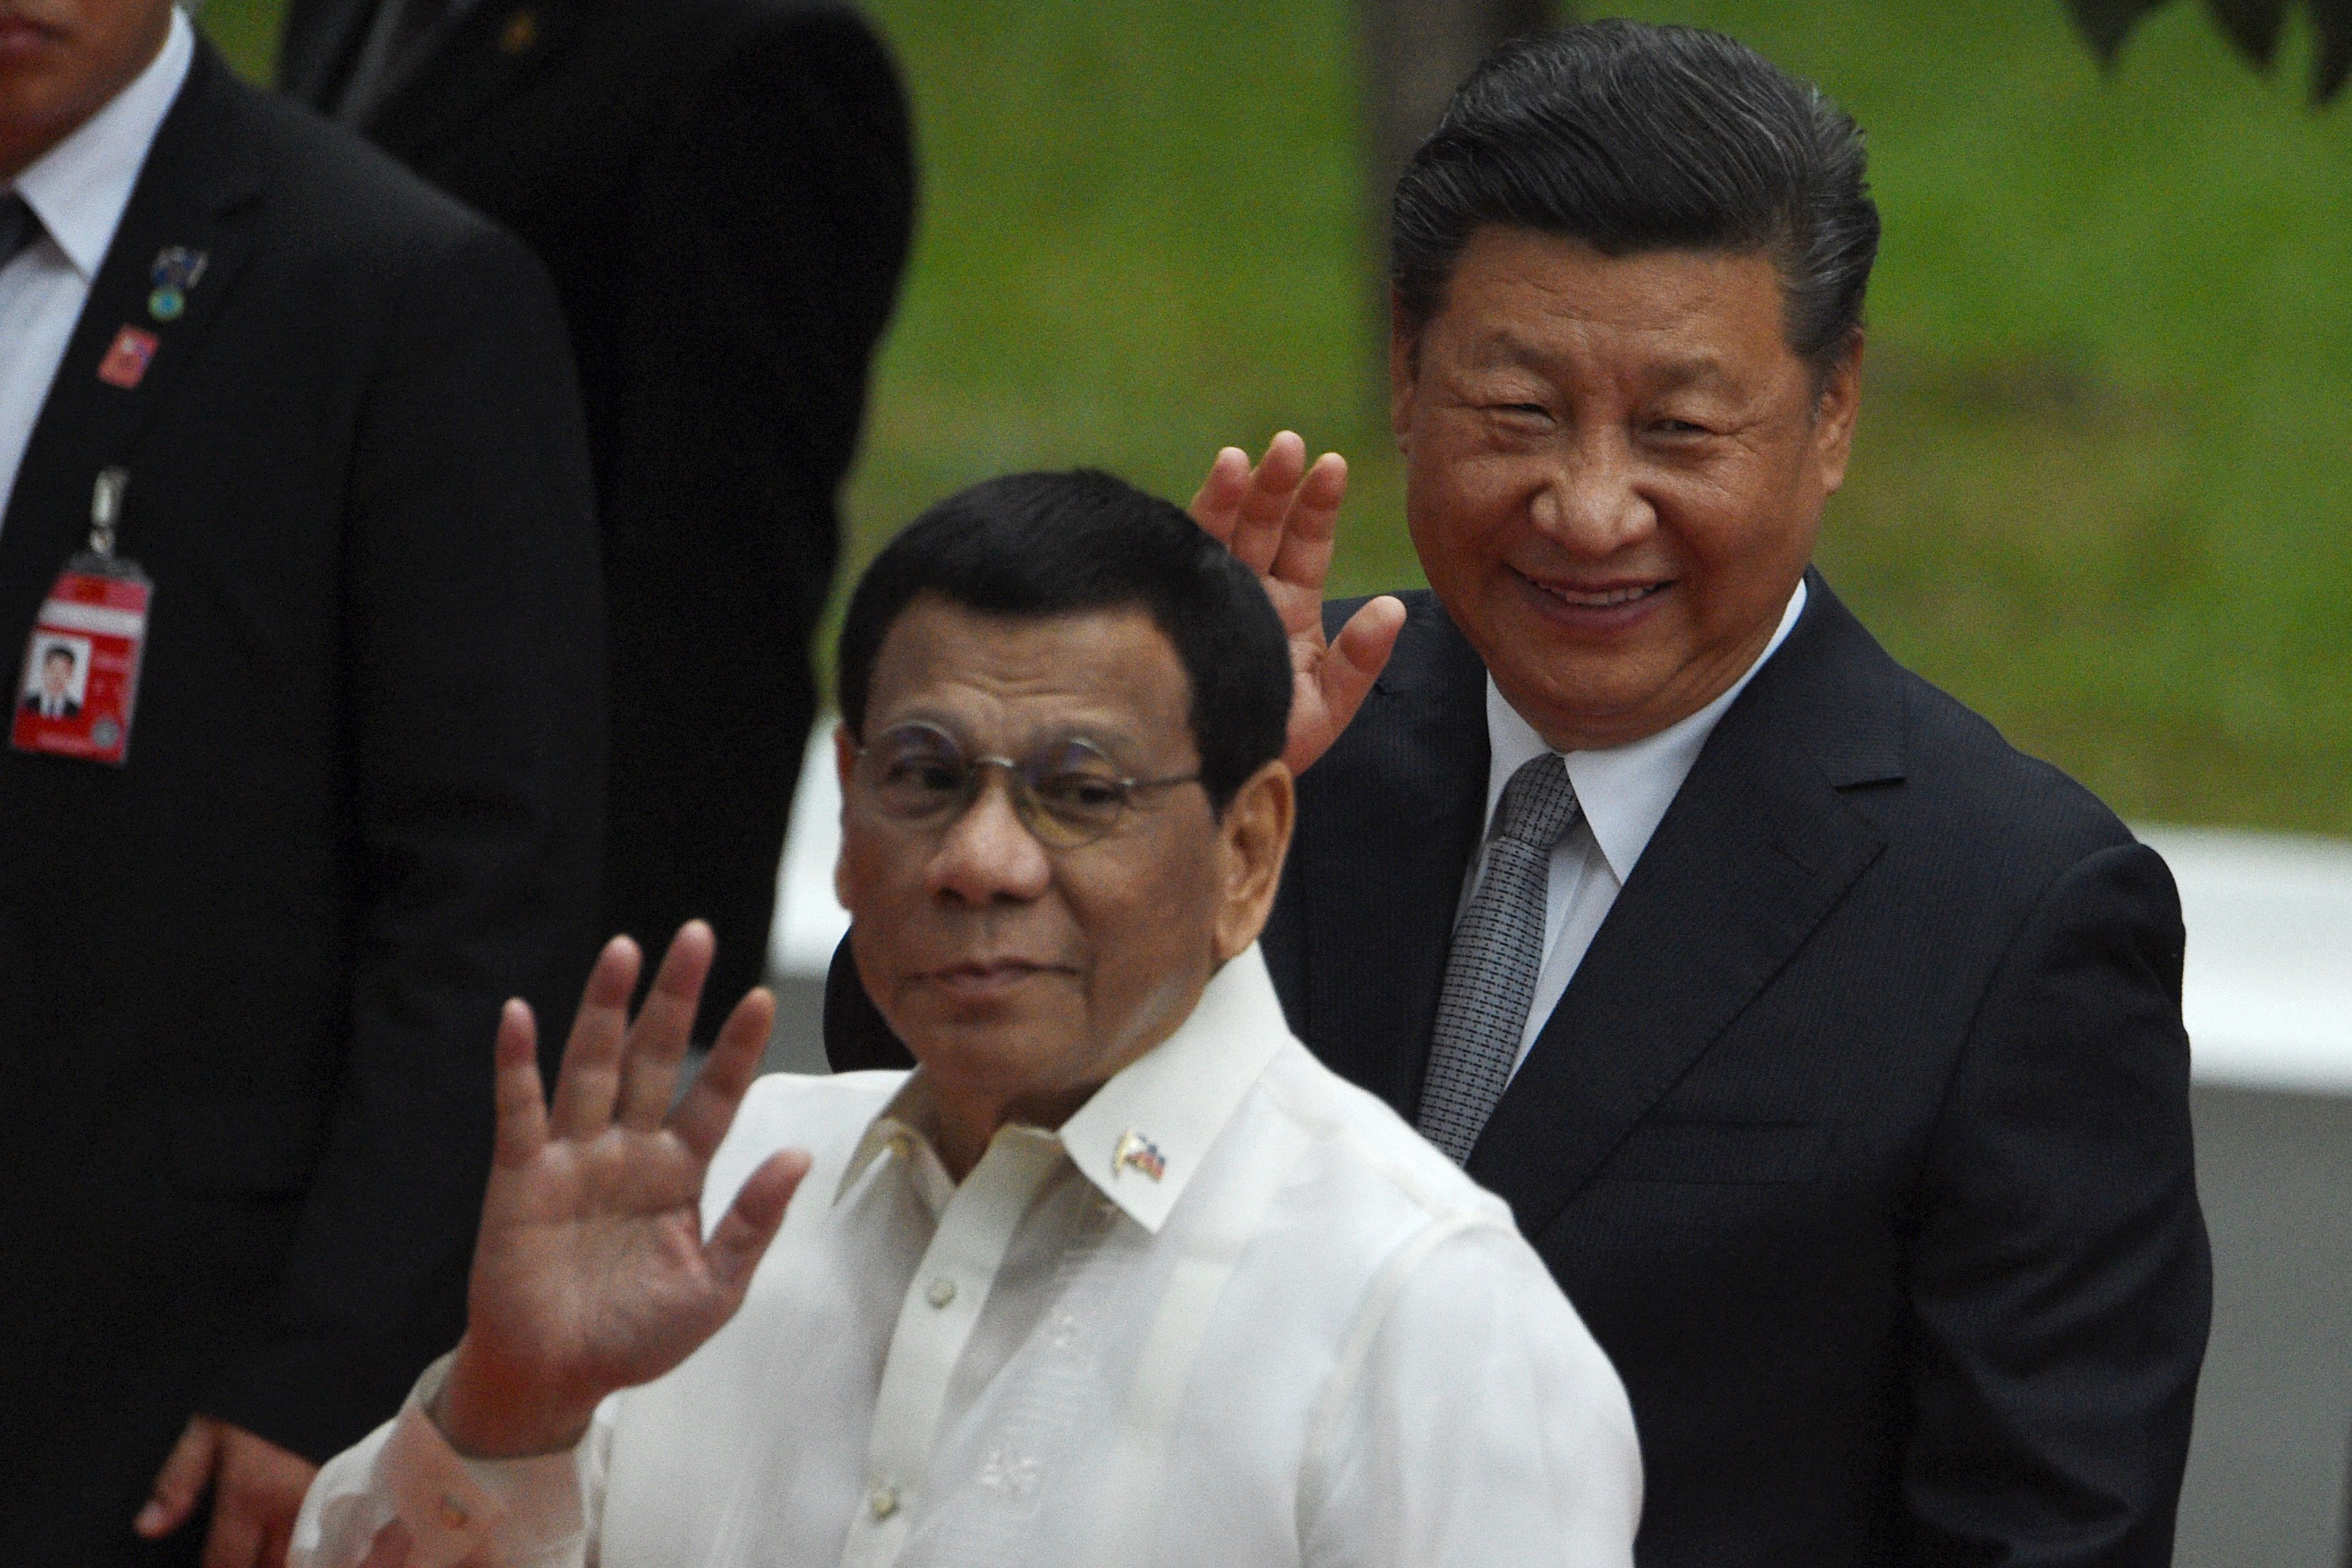 China says the deal it made with former Philippine president Rodrigo Duterte (left) was intended to manage the situation on a contested South China Sea reef, maintain peace and prevent conflict. Photo: AFP